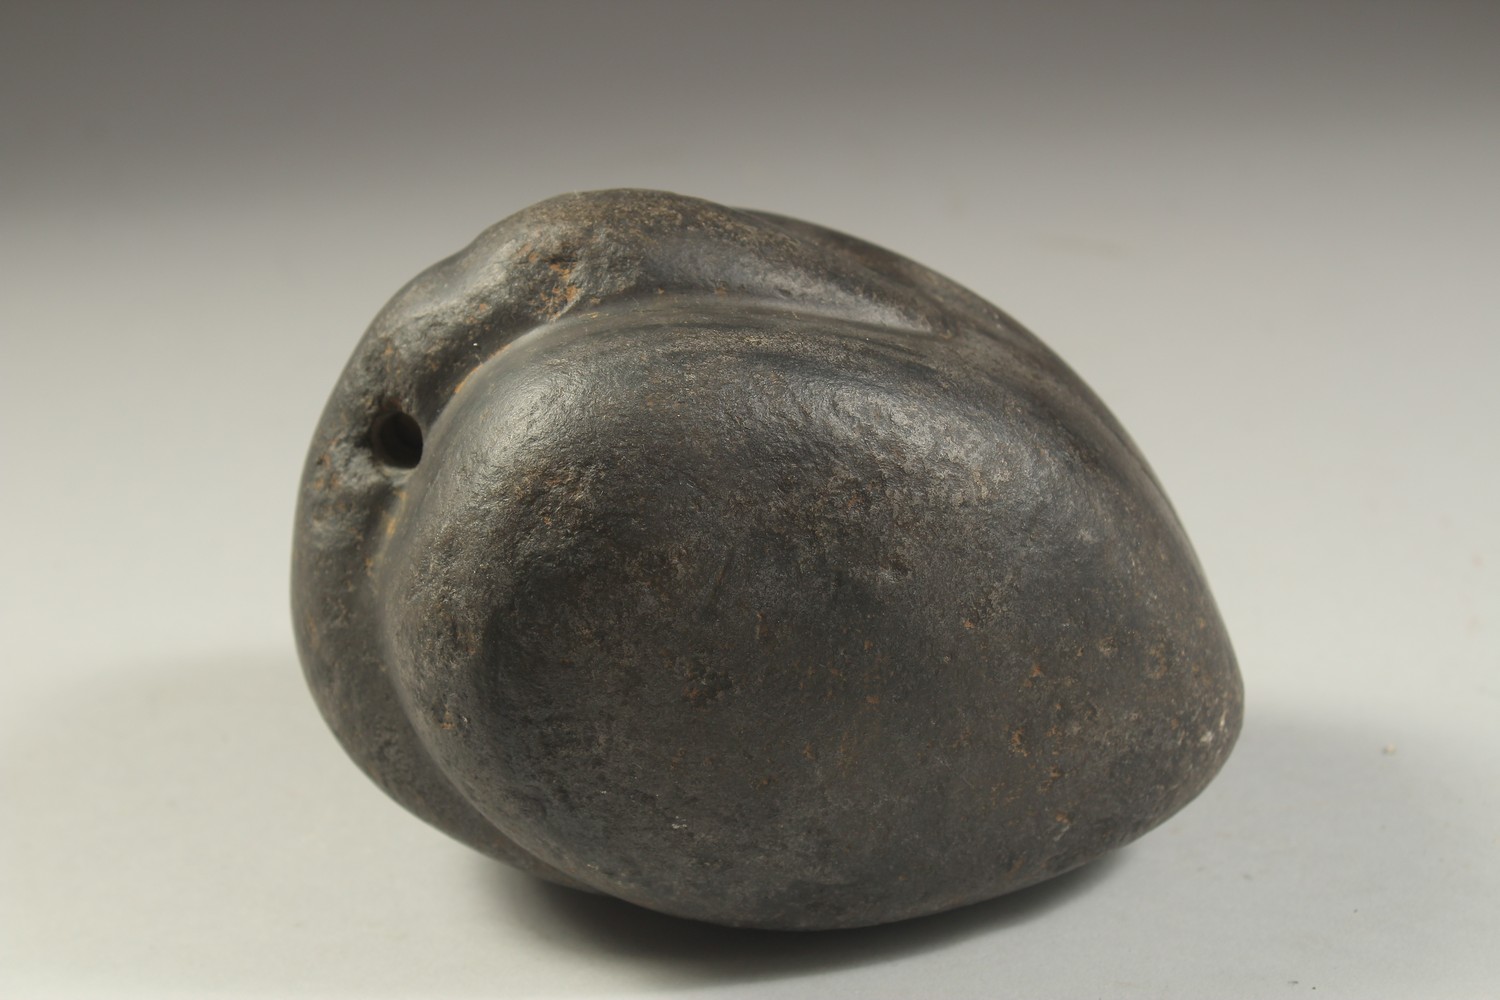 A CARVED STONE WEIGHT IN THE FROM OF A BIRD, 15cm long.